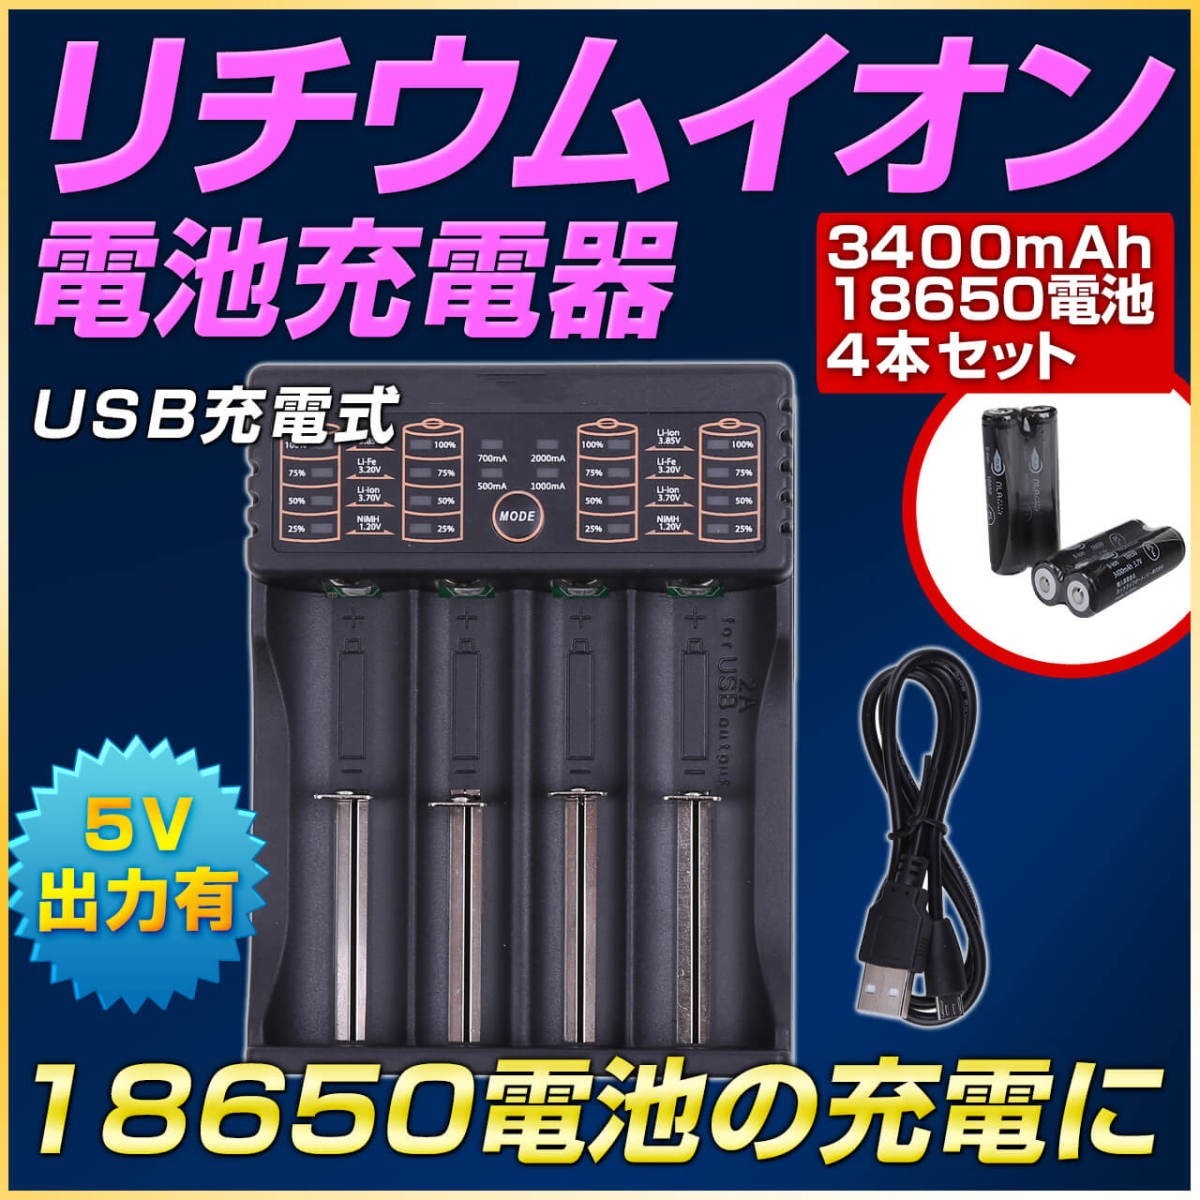  lithium battery charger *18650 battery ( Panasonic made cell )4 pcs set 